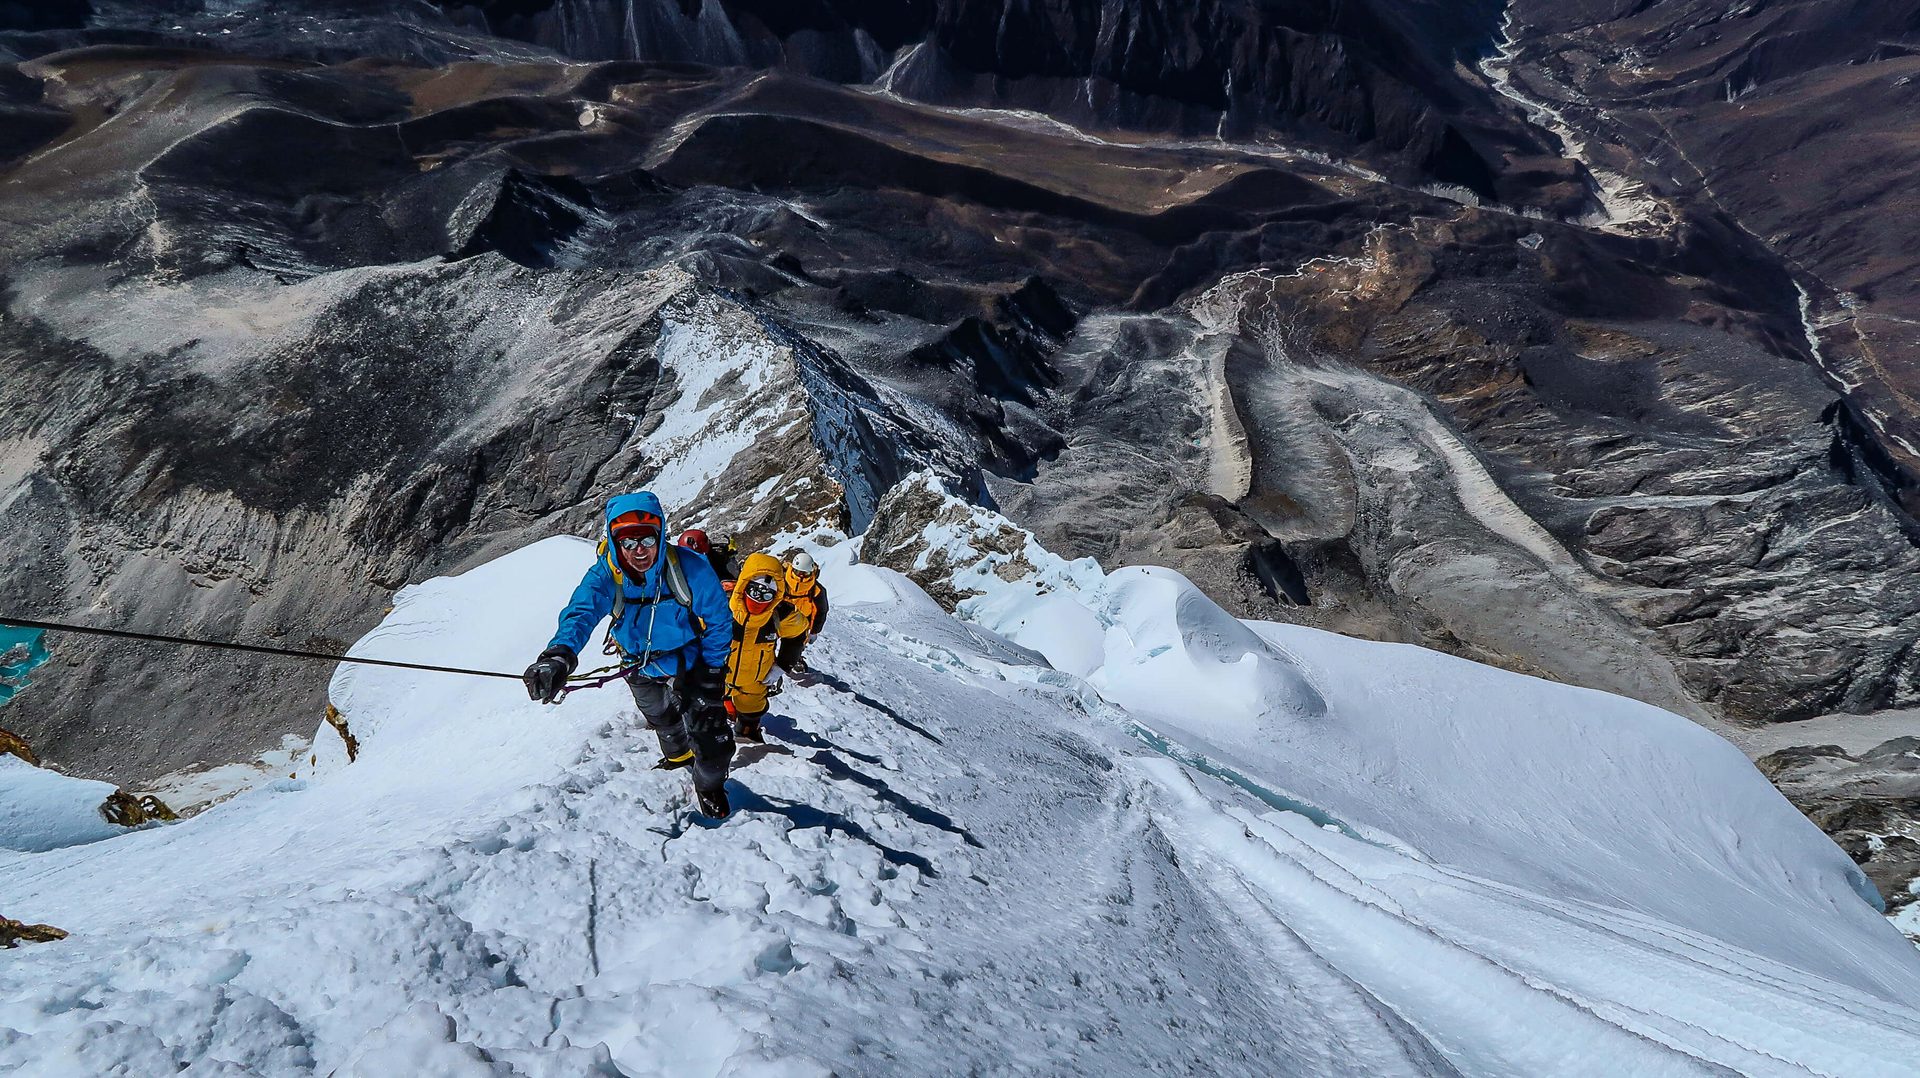 How To Prepare For Climbing Mount Everest Logistics And Physical Training 